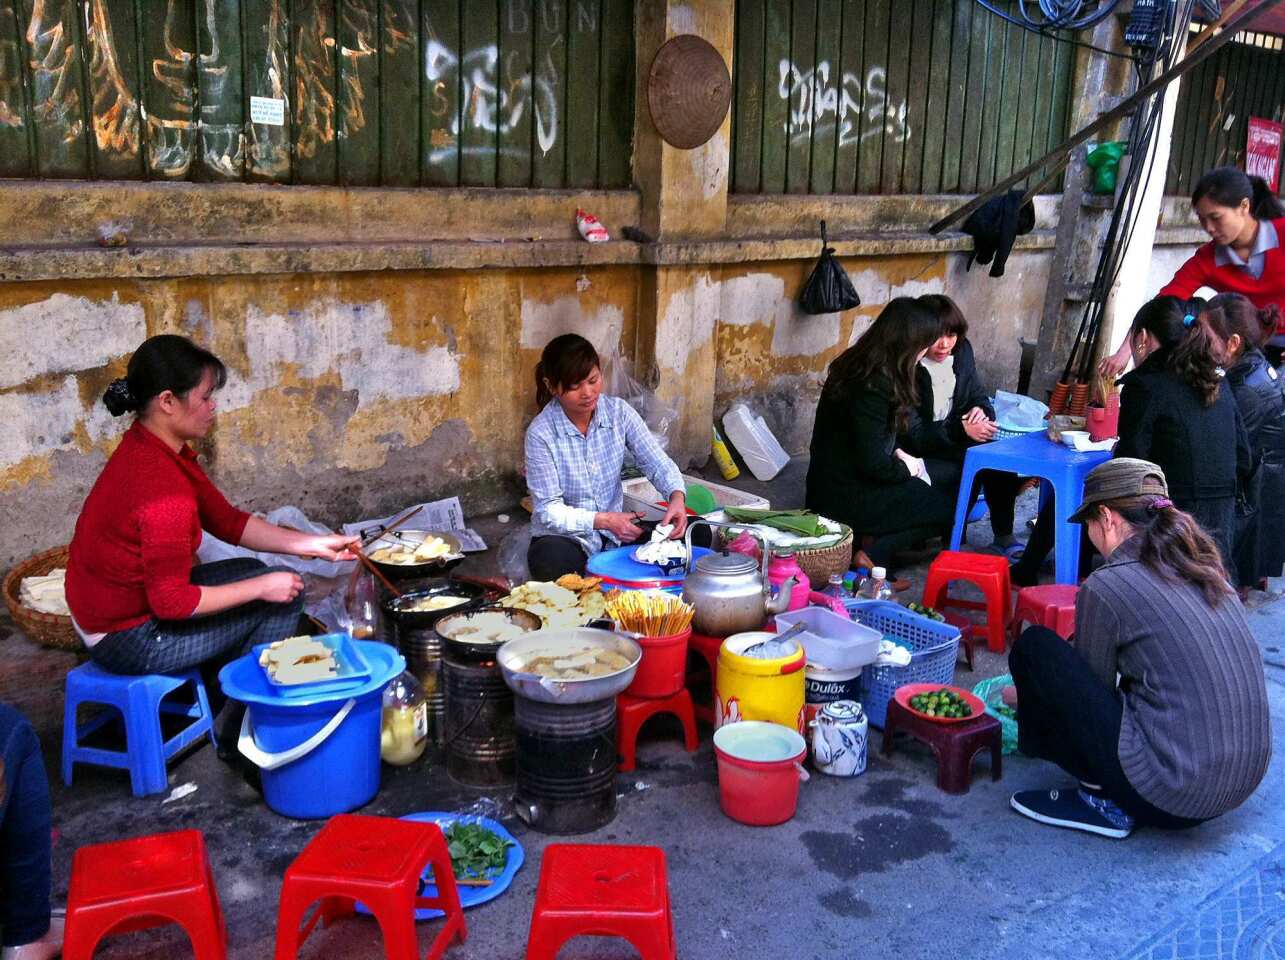 Women prepare a variety of soups, with a focus on bun dau (fried tofu soup), in an alley near the Hanoi Opera House. Broth is kept warm over coals in tin cans and diners squat on small plastic stools to consume their food.